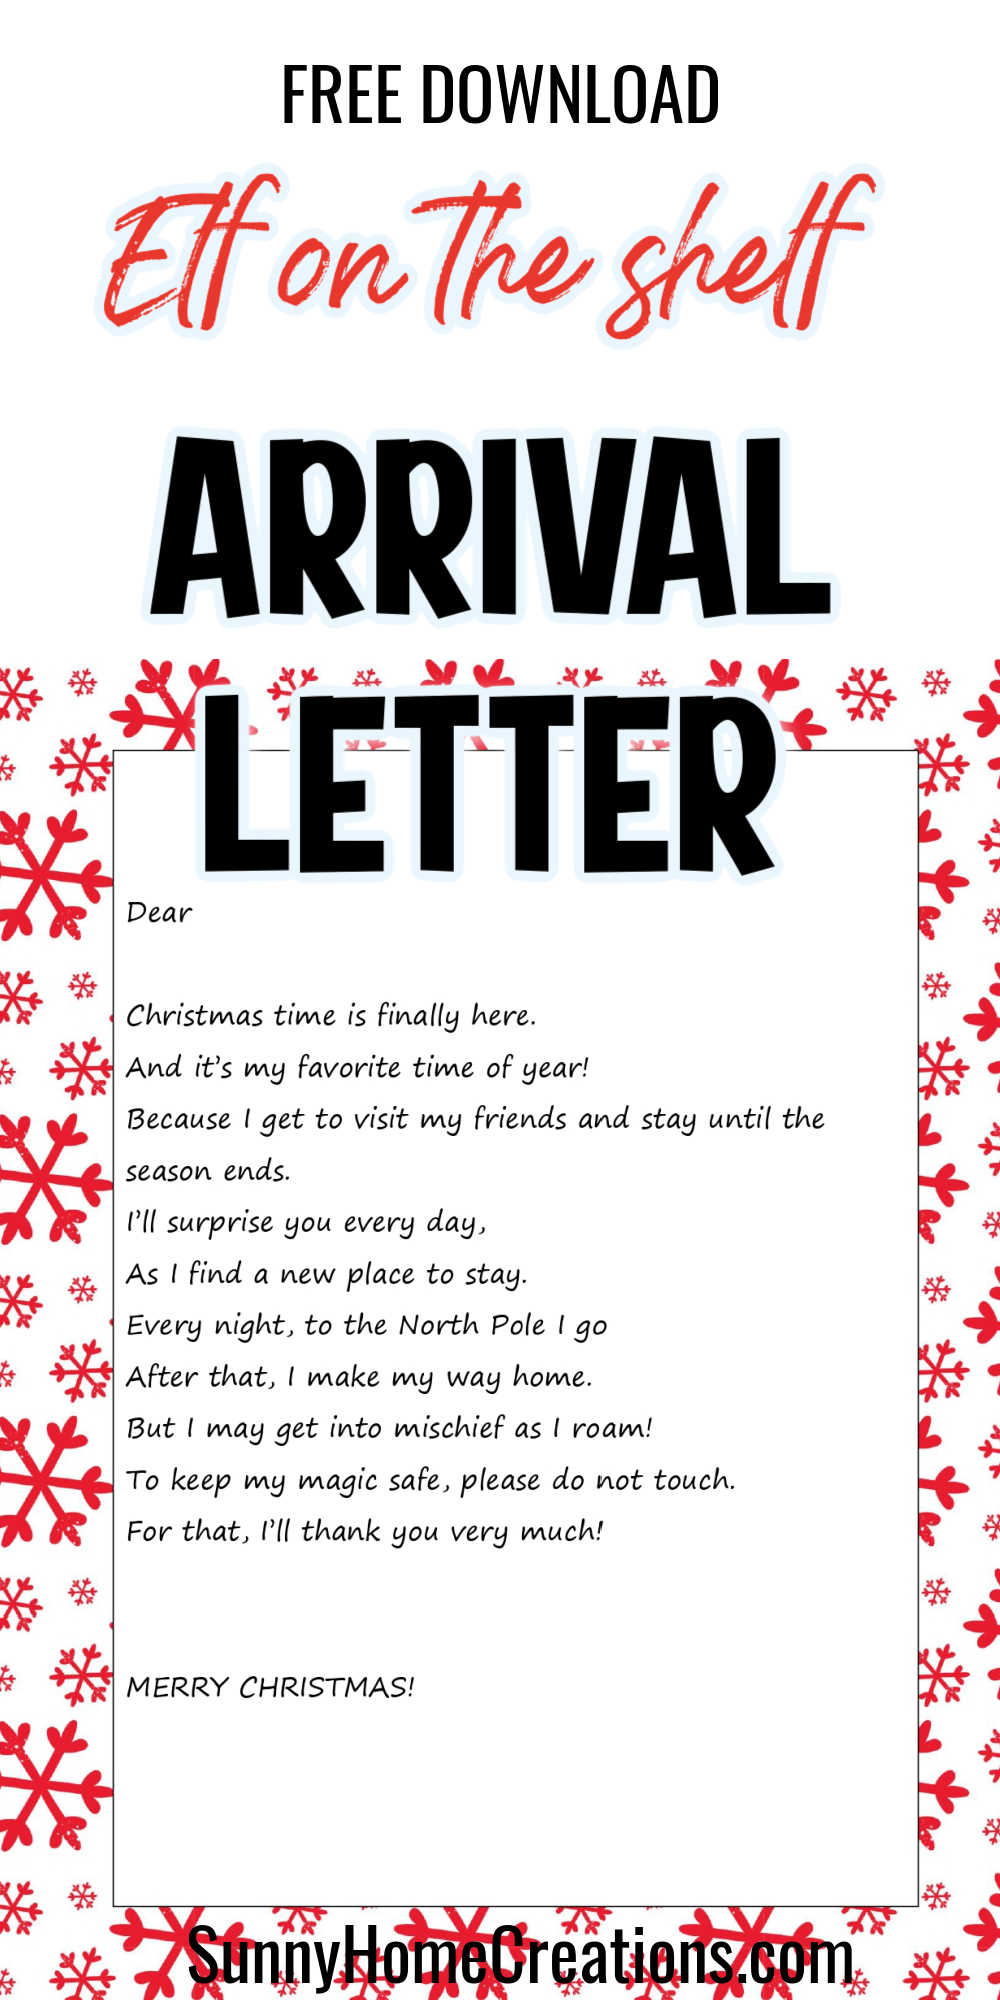 elf-on-the-shelf-arrival-letter-printable-template-free-sunny-home